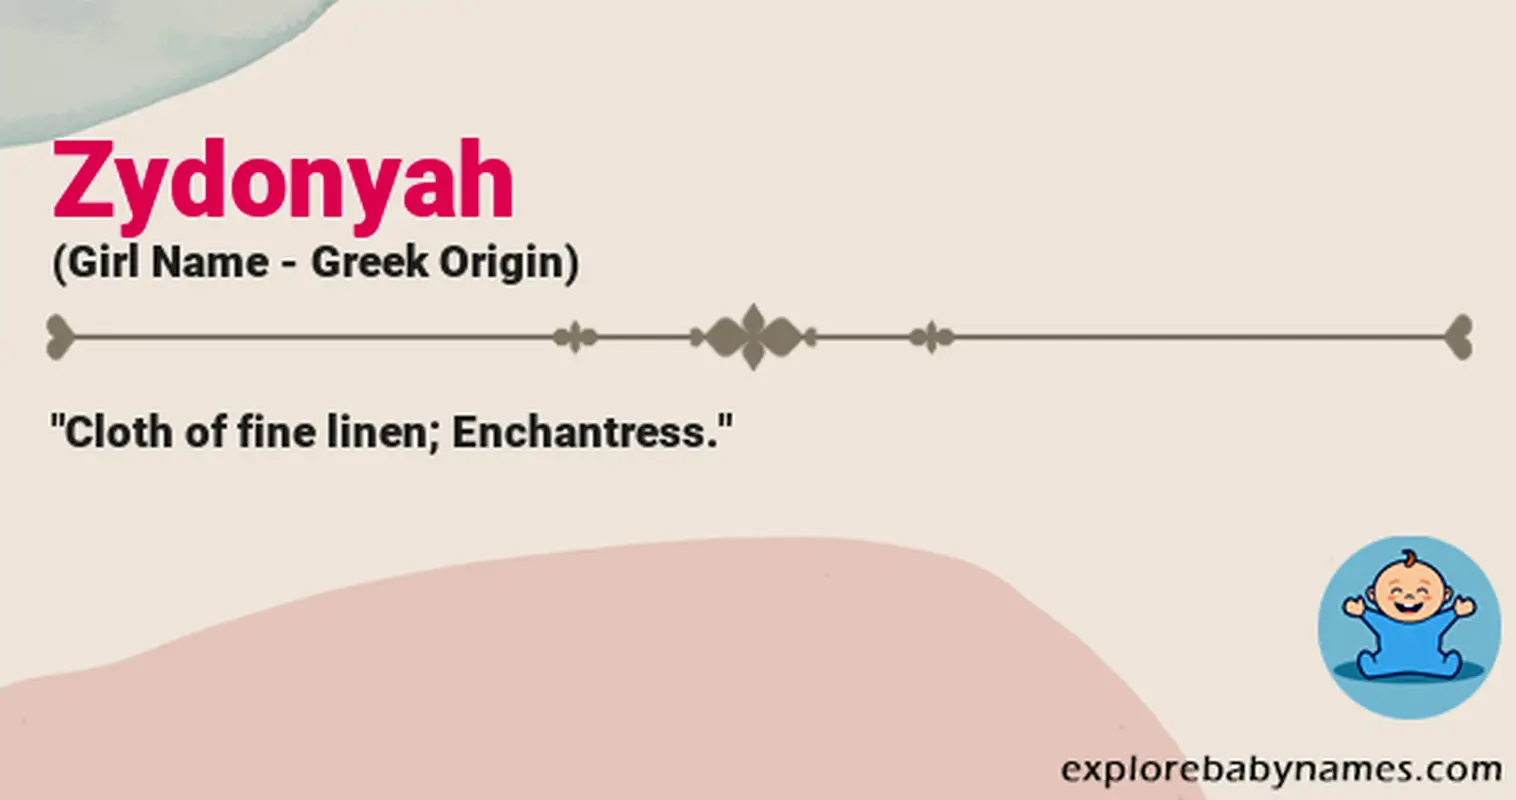 Meaning of Zydonyah